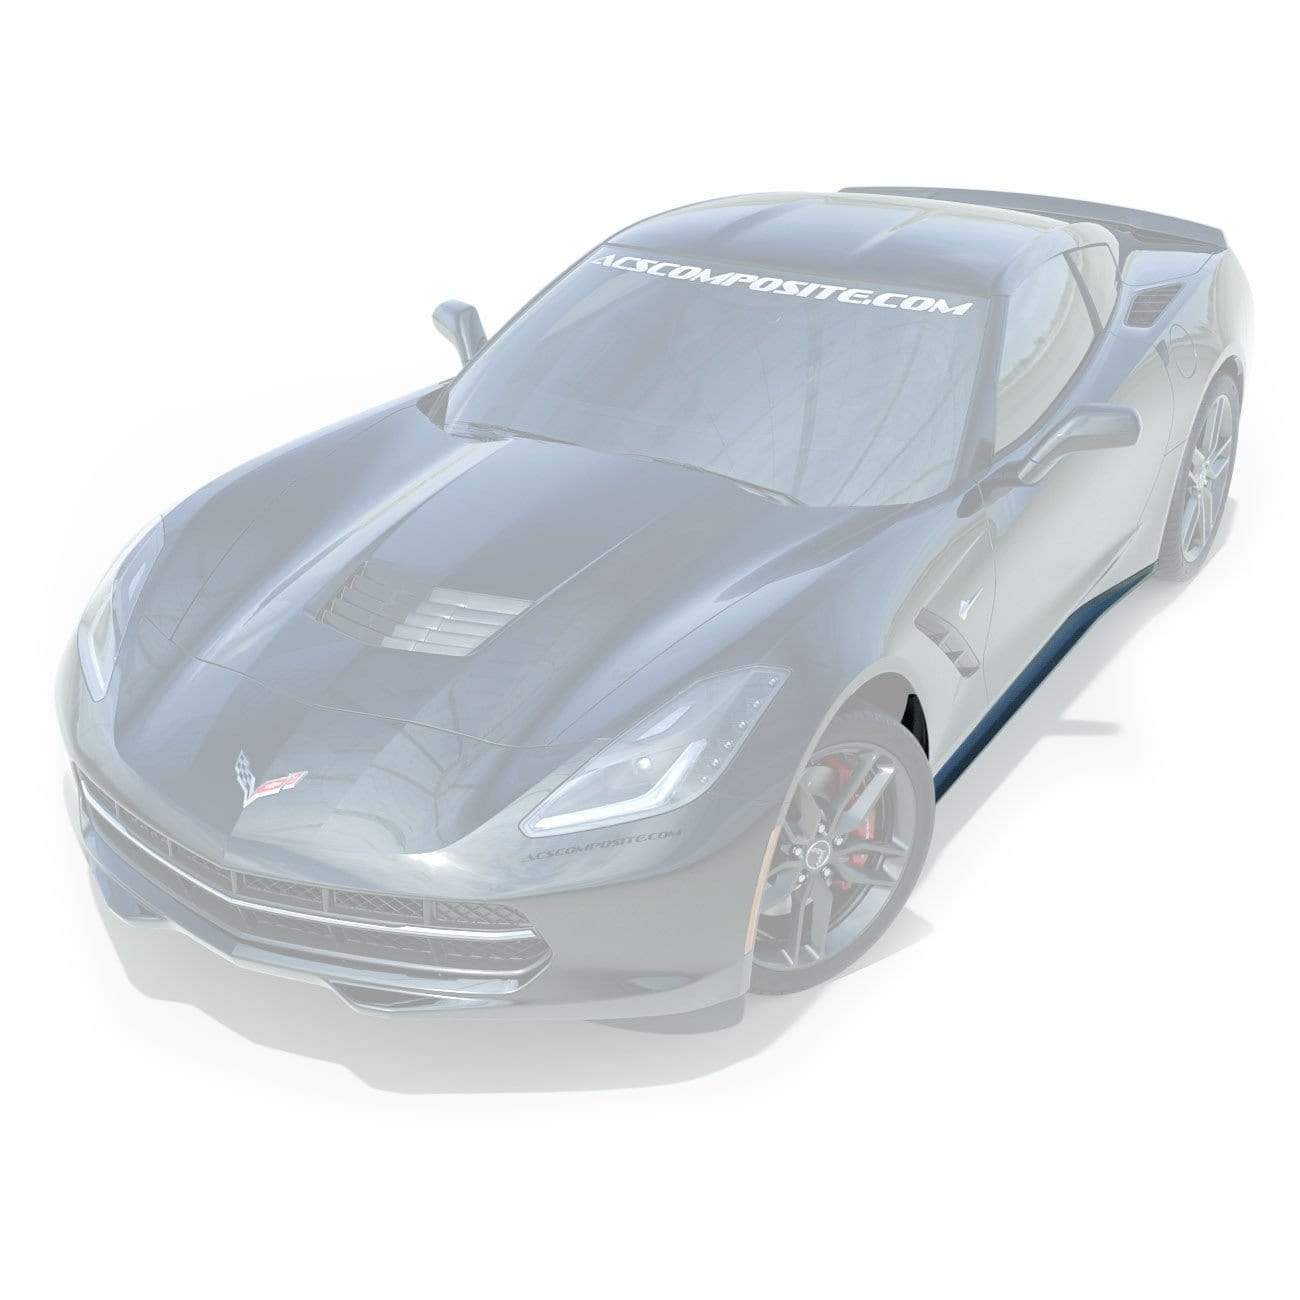 ACS Zero1 Side Rockers for C7 Corvette Stingray in Carbon Flash Metallic Black, made from OEM-validated RTM composite material. SKU: 45-4-001CFZ.